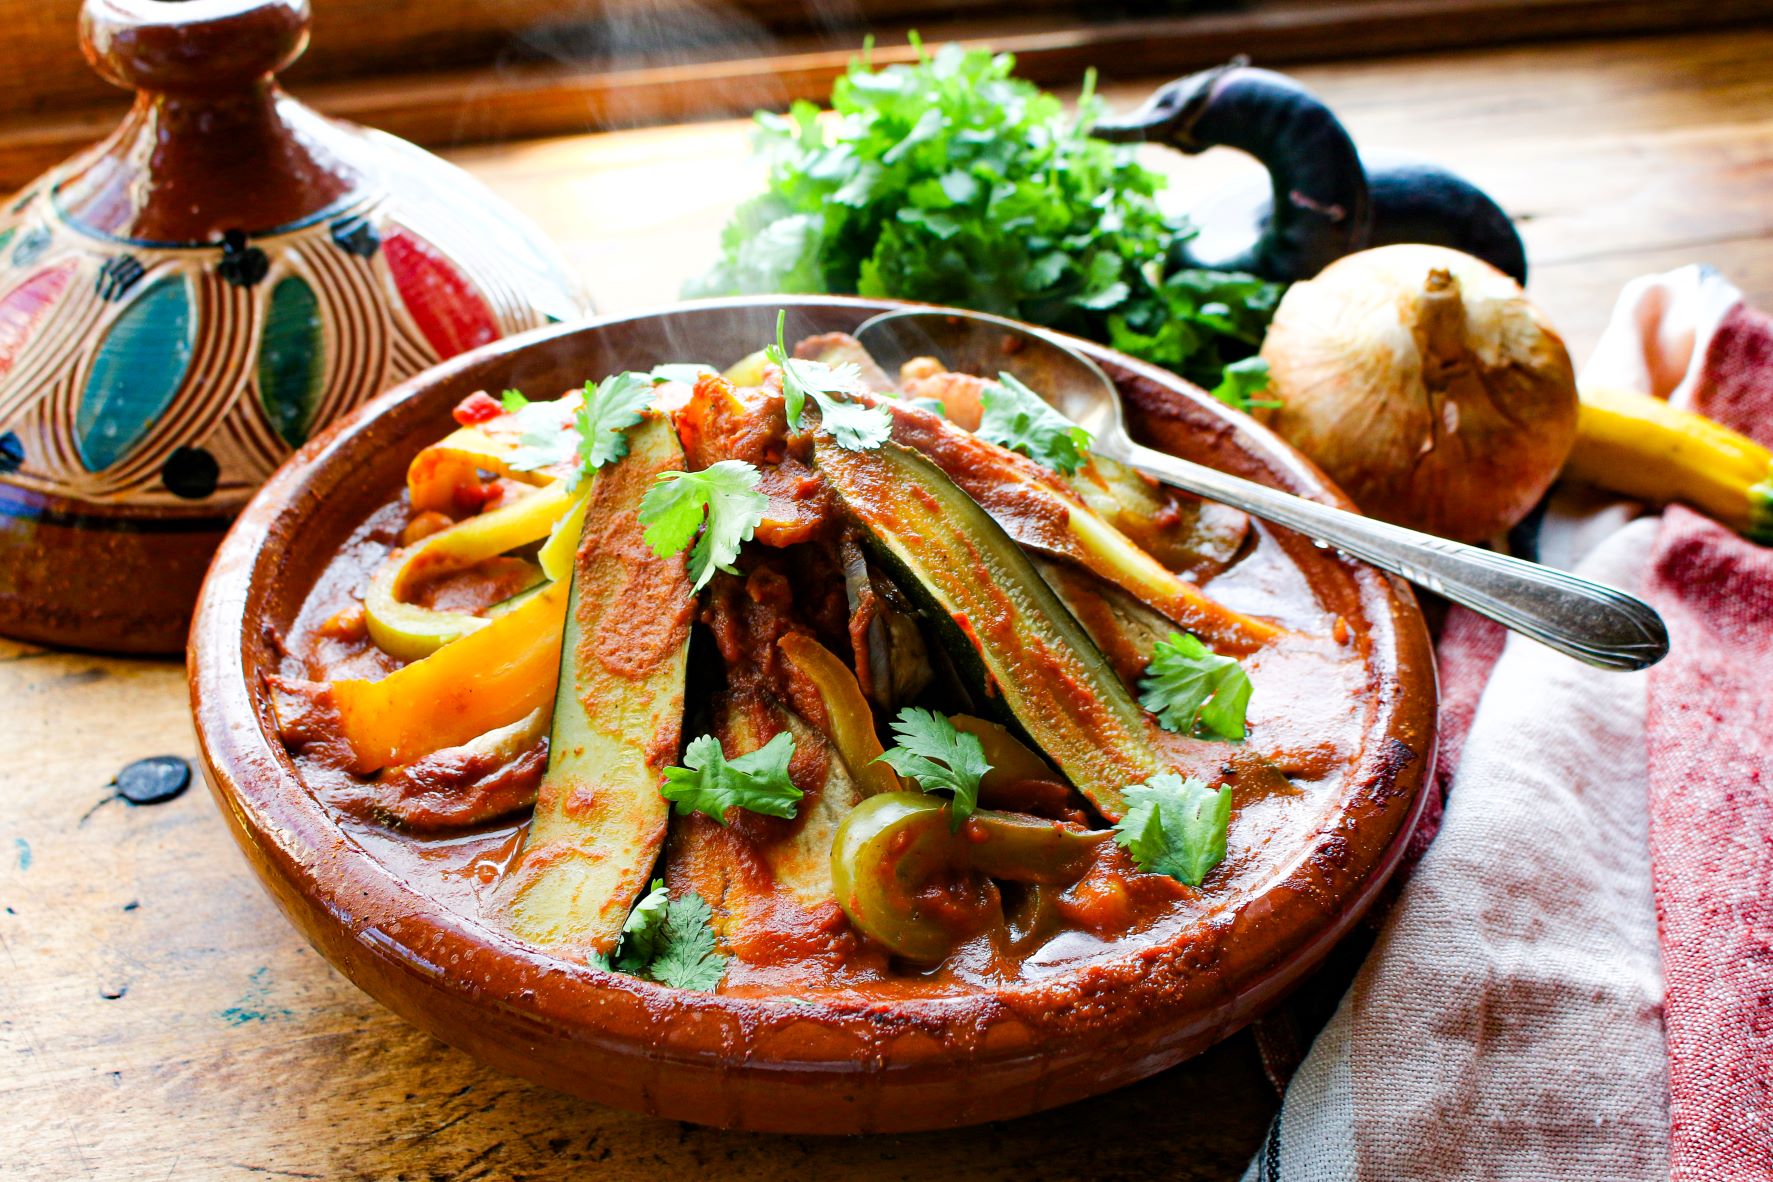 Vegetable Tagine with Chickpeas - Sharon Palmer, The Plant Powered Dietitian